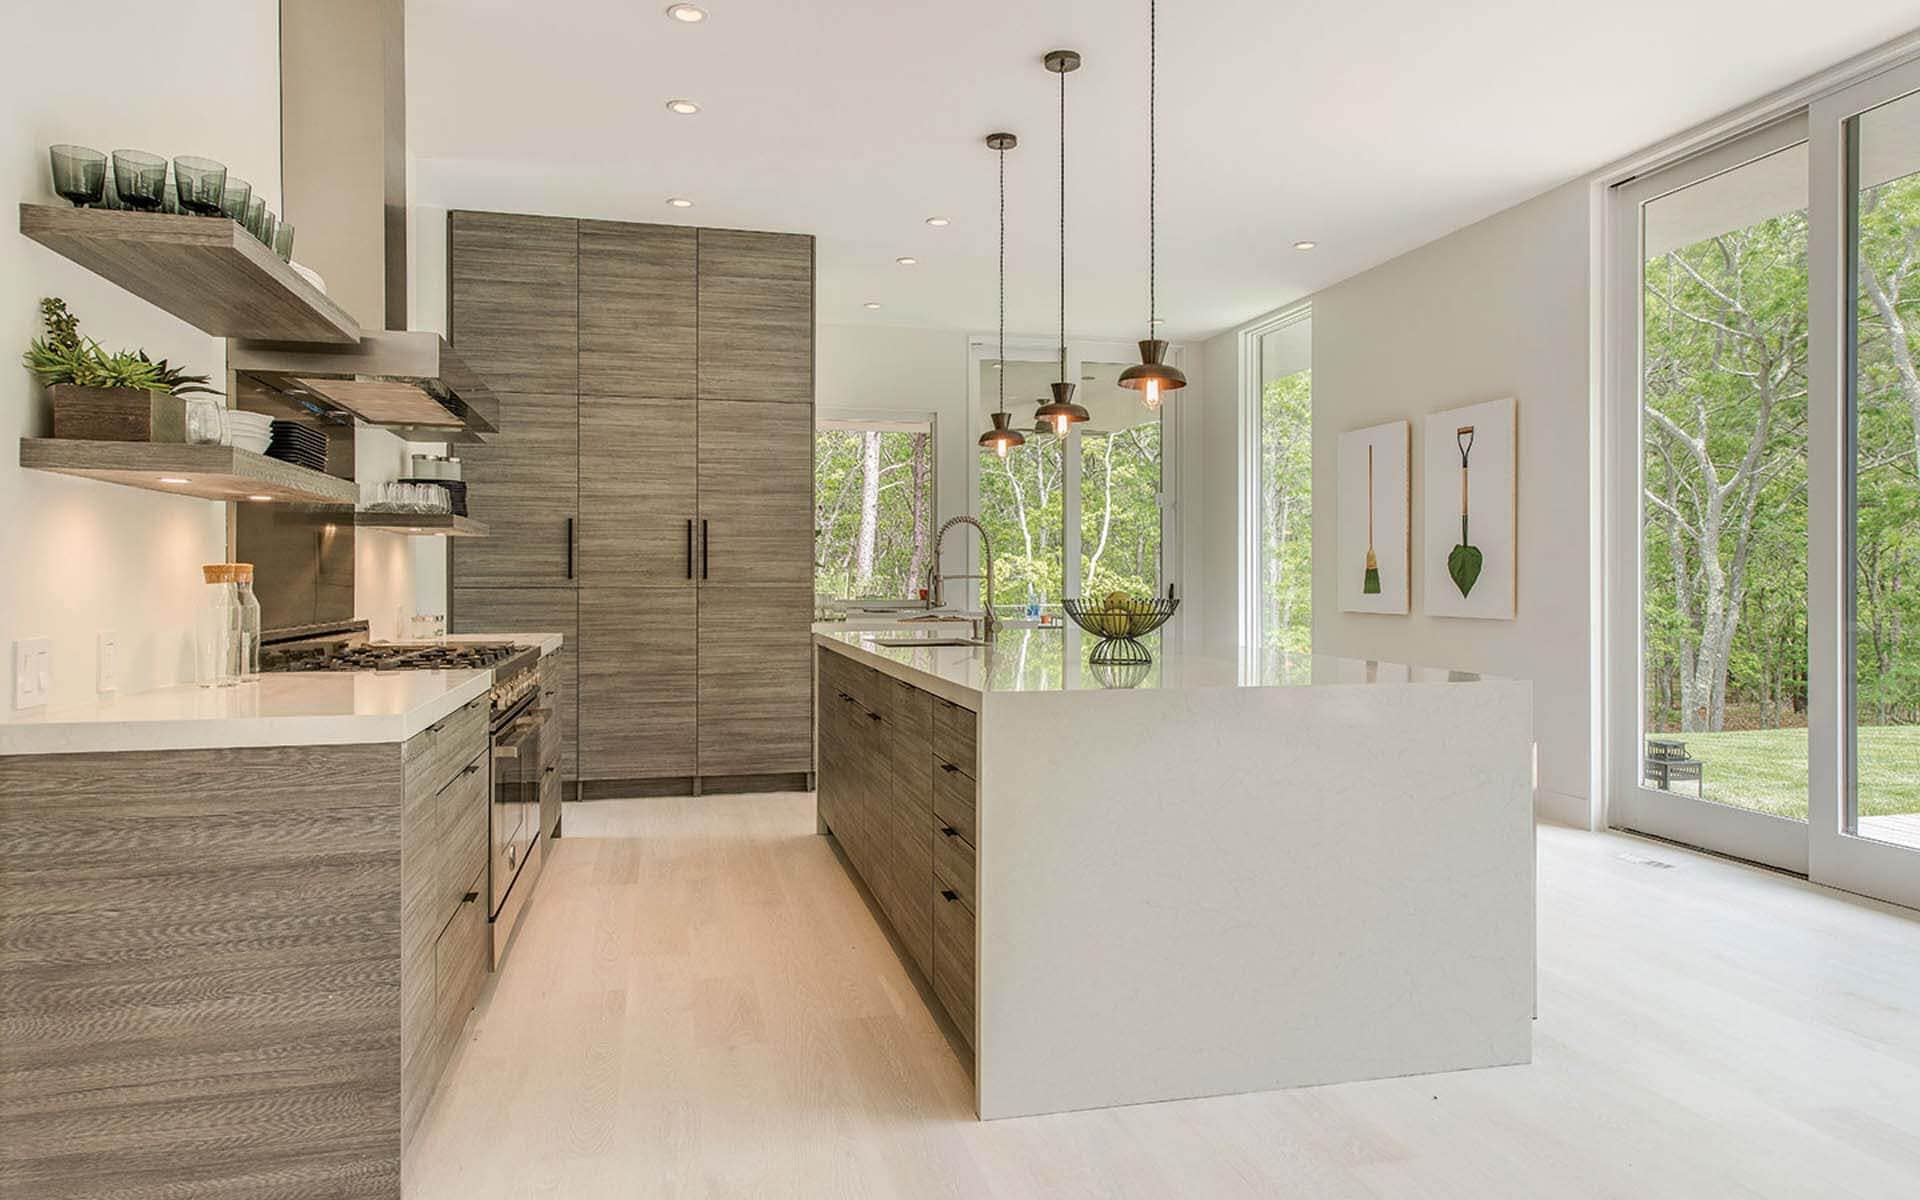 Horizontal laminate cabinetry adds texture to a monochromatic contemporary kitchen  in The Hamptons. Floor to ceiling windows.